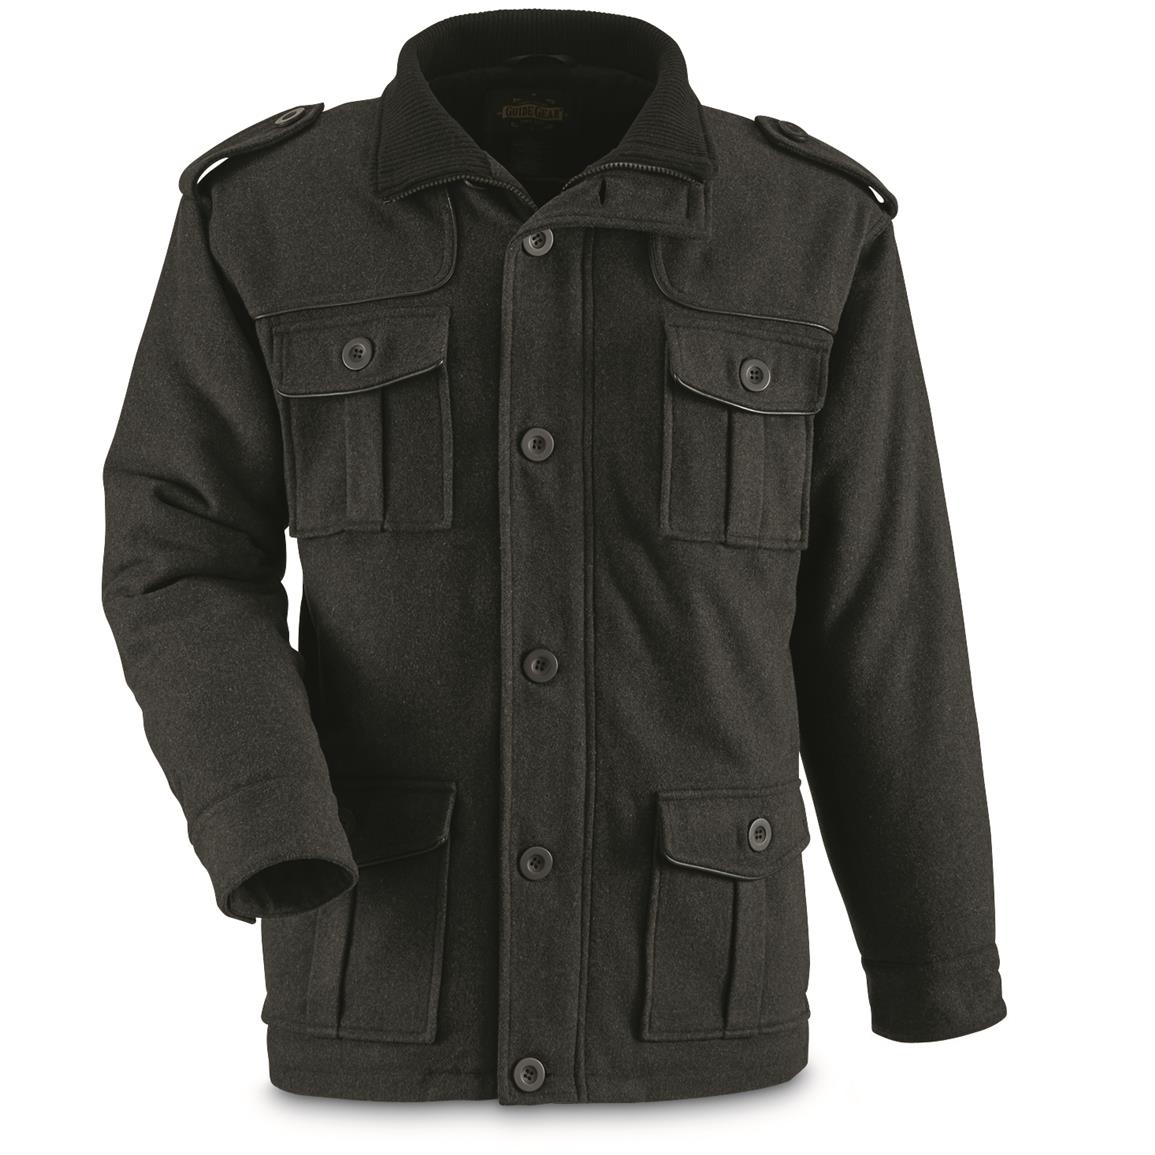 Guide Gear Men's Military Style Jacket - 671065, Uninsulated ...